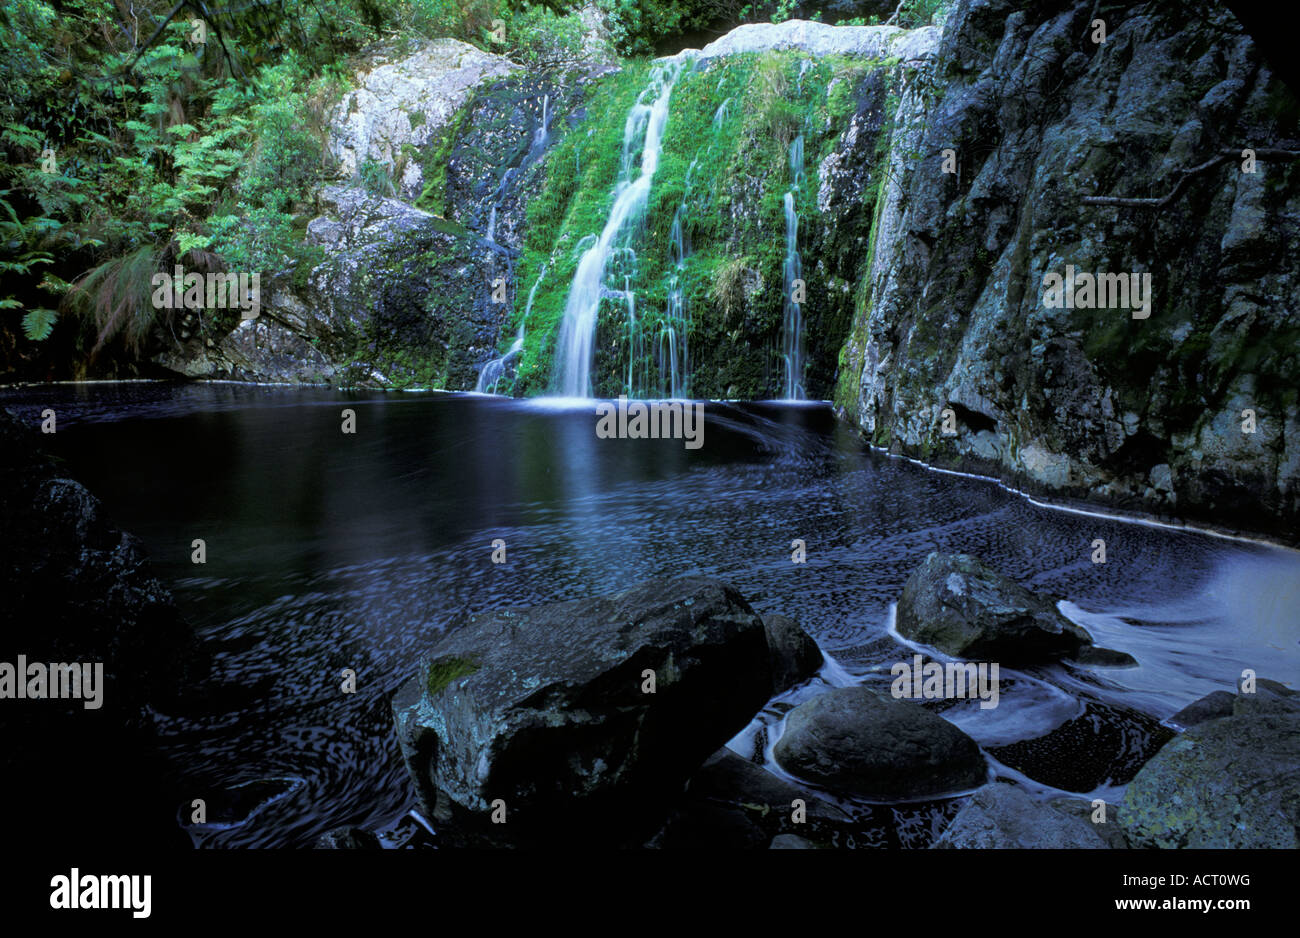 Waterfall and plunge pool Luiperdskloof Harold Porter Botanical Gardens Betties Bay Cape South Africa Stock Photo